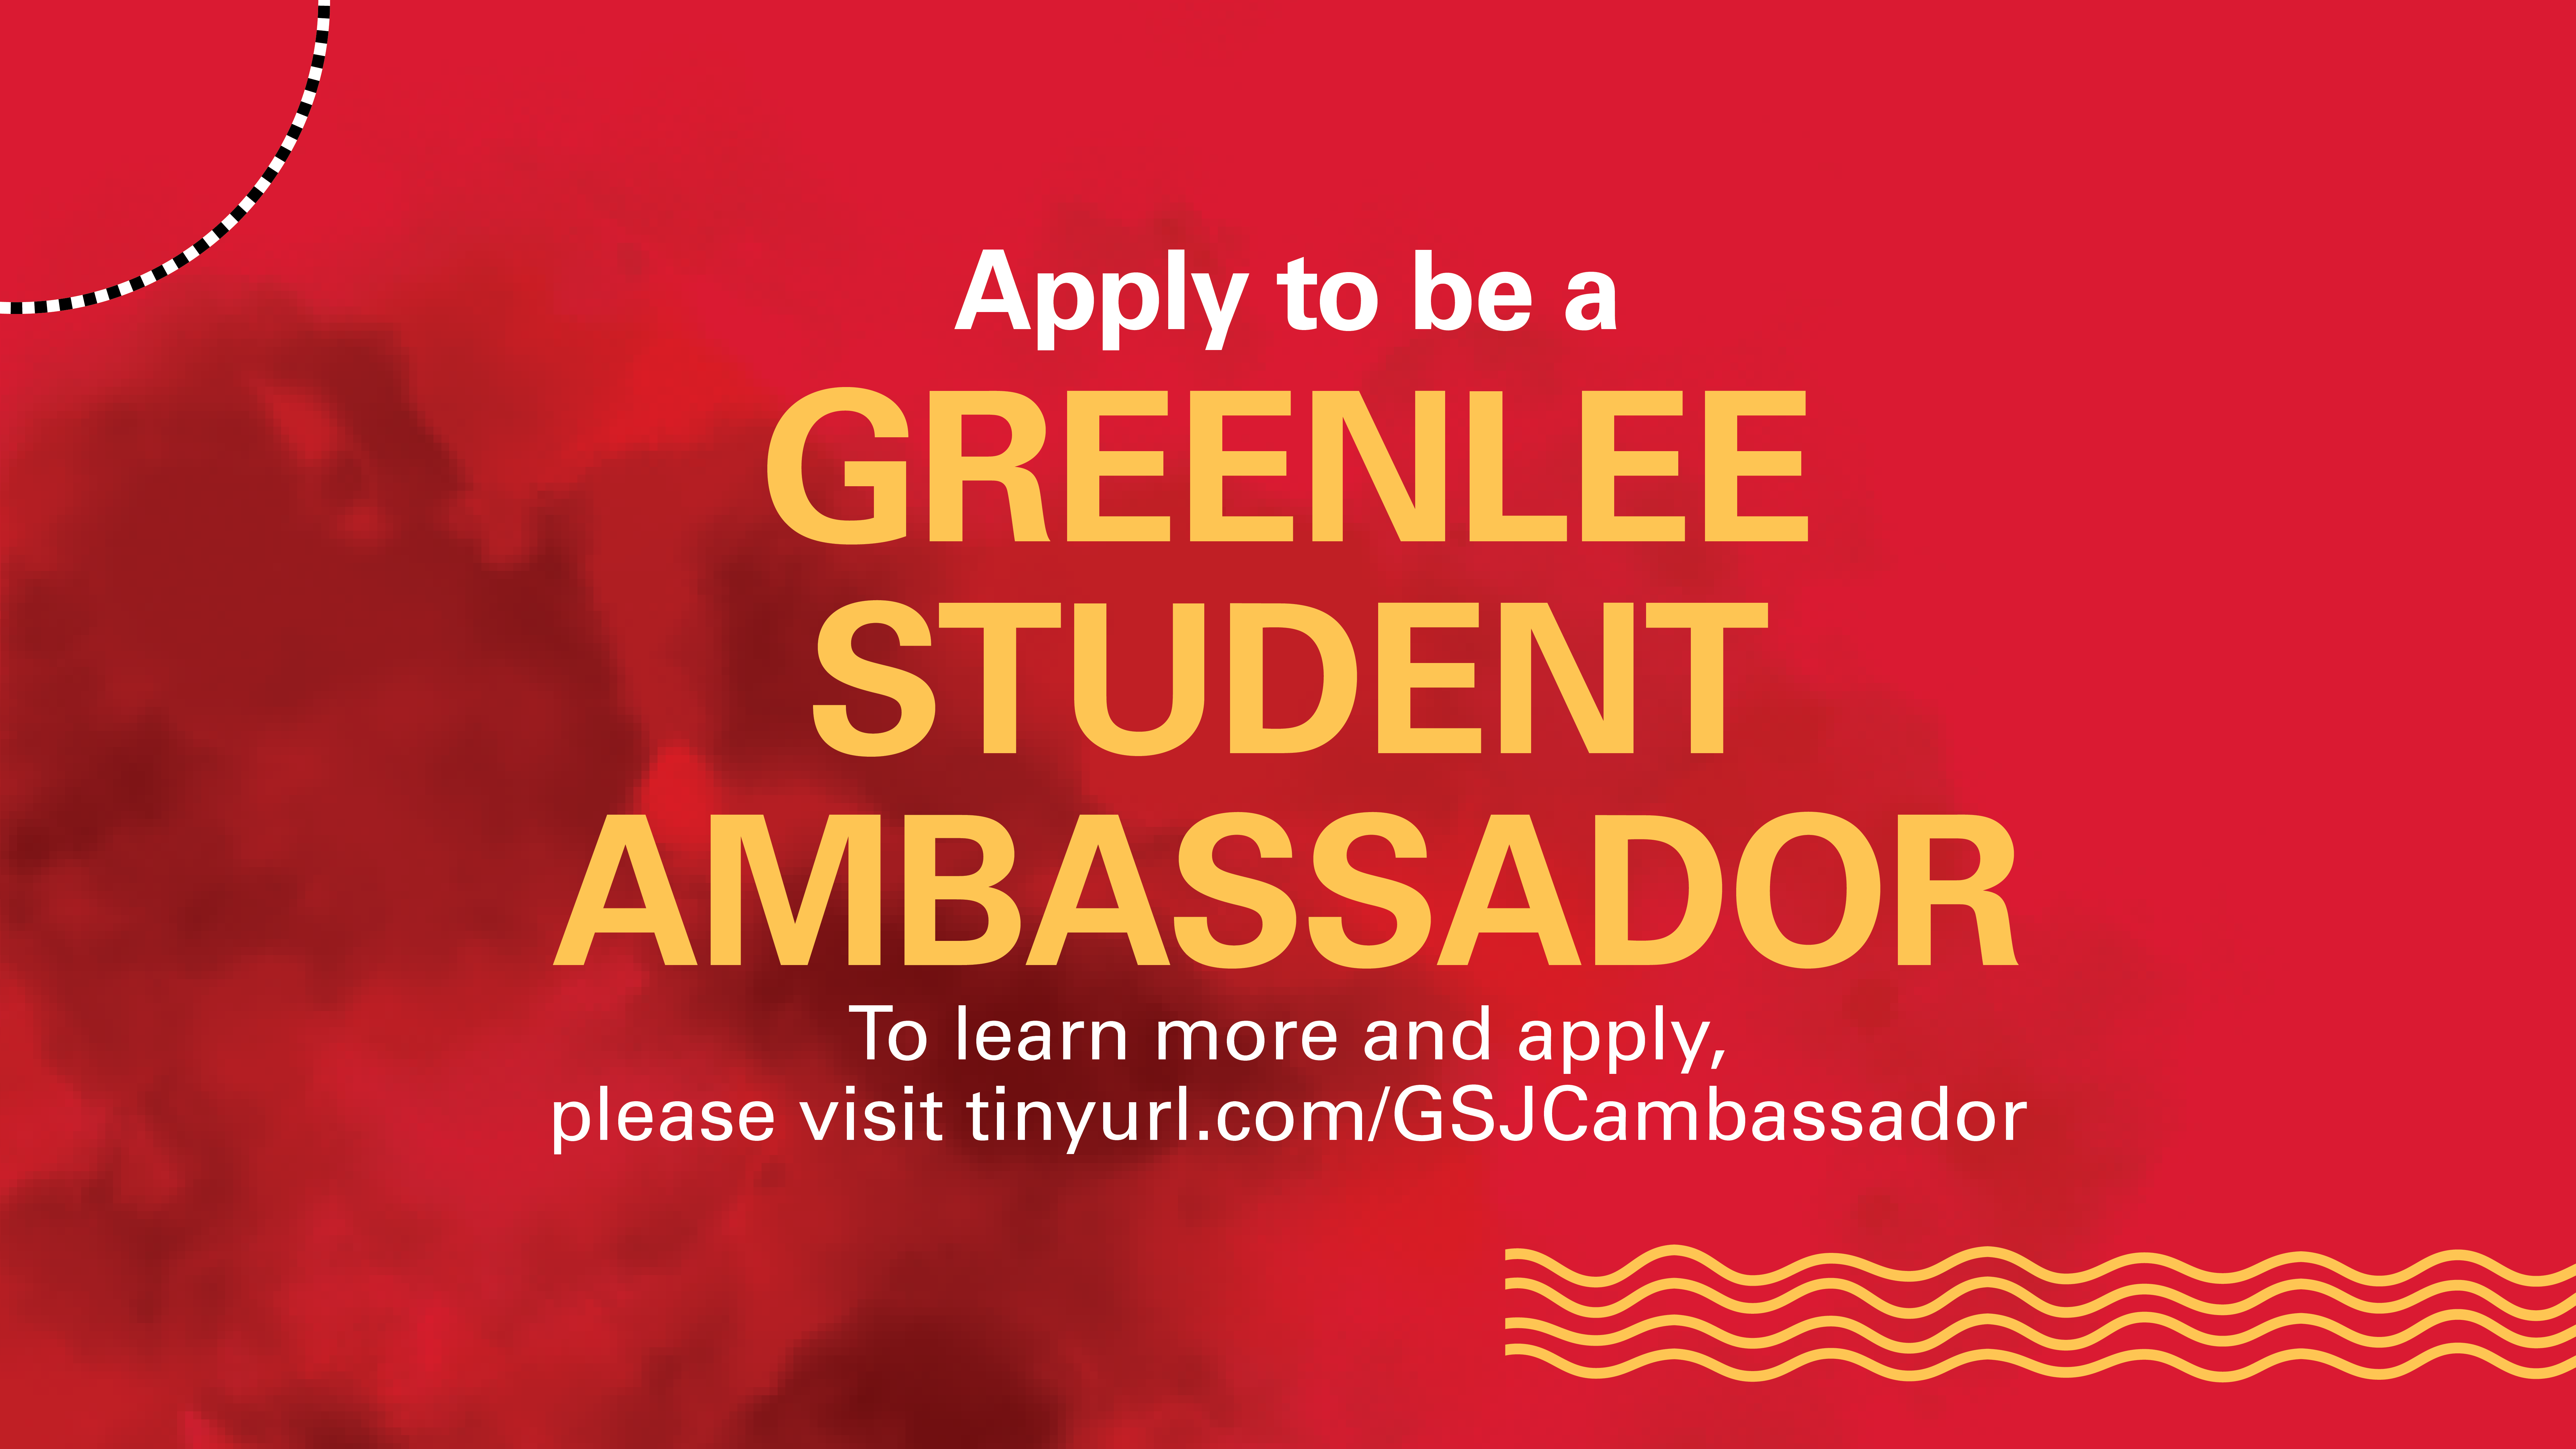 Apply to be a Greenlee Student Ambassador. To learn more and apply, visit tinyurl/GSJCambassador